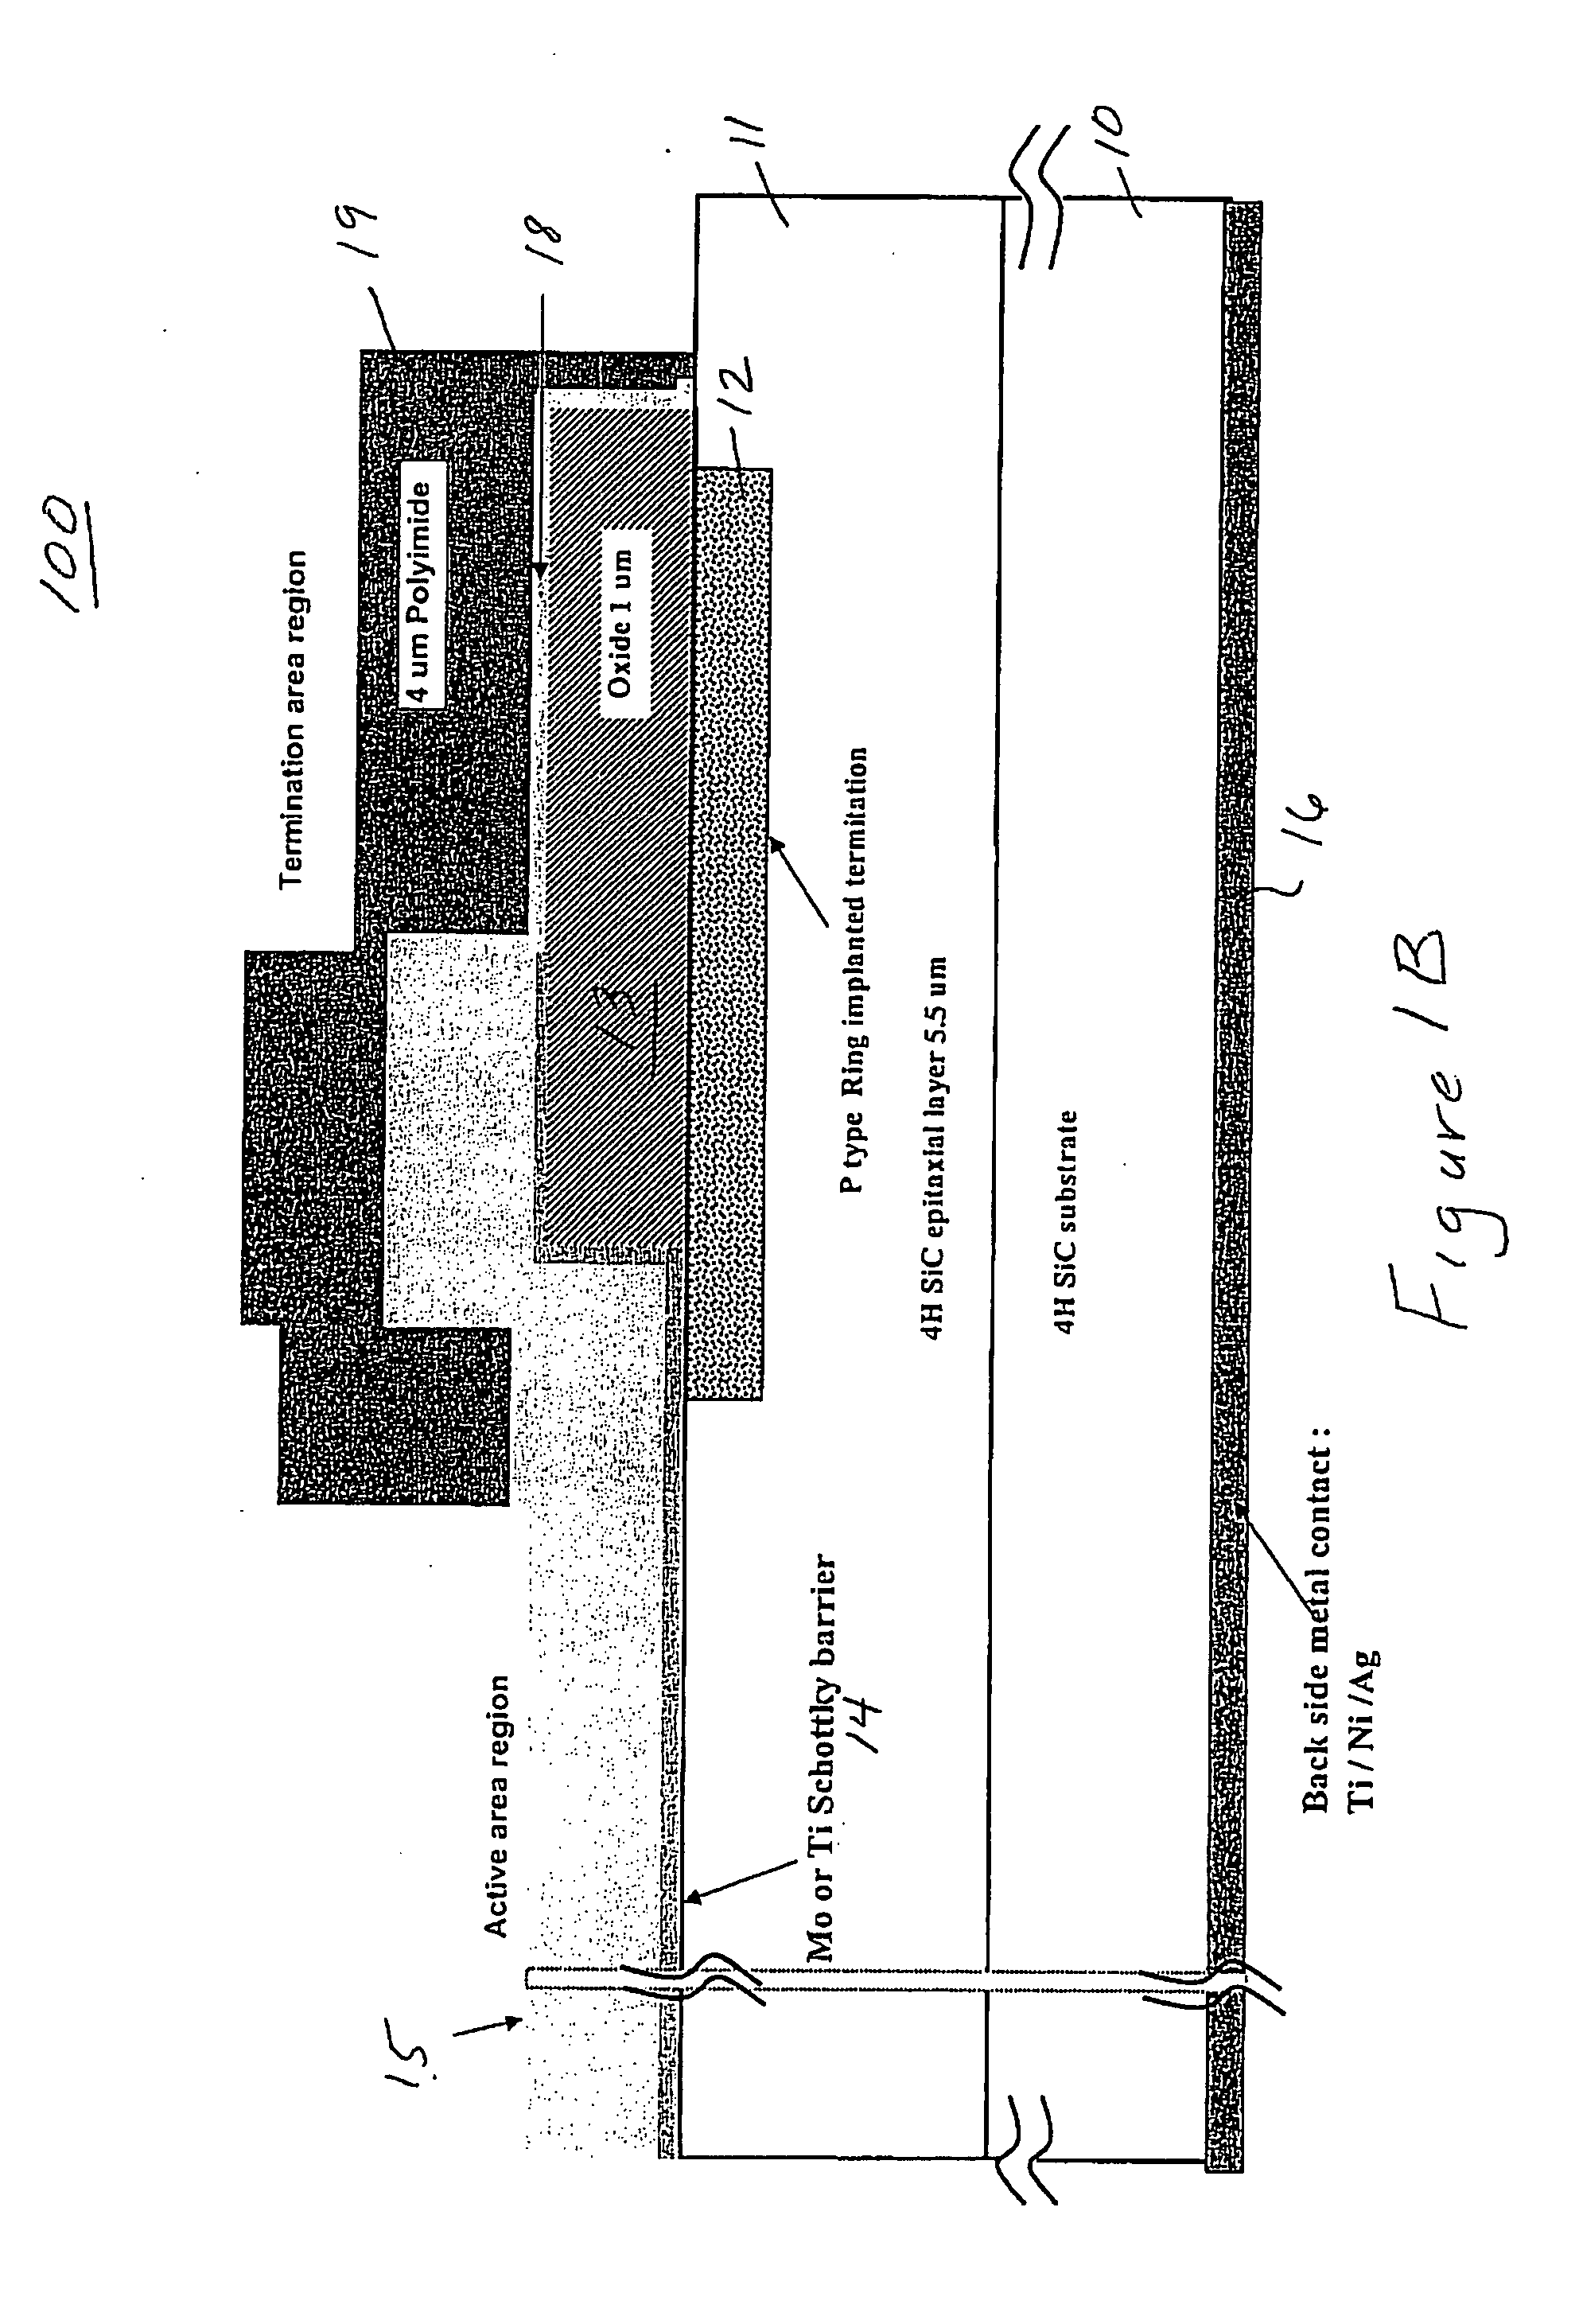 Molybdenum barrier metal for SiC Schottky diode and process of manufacture